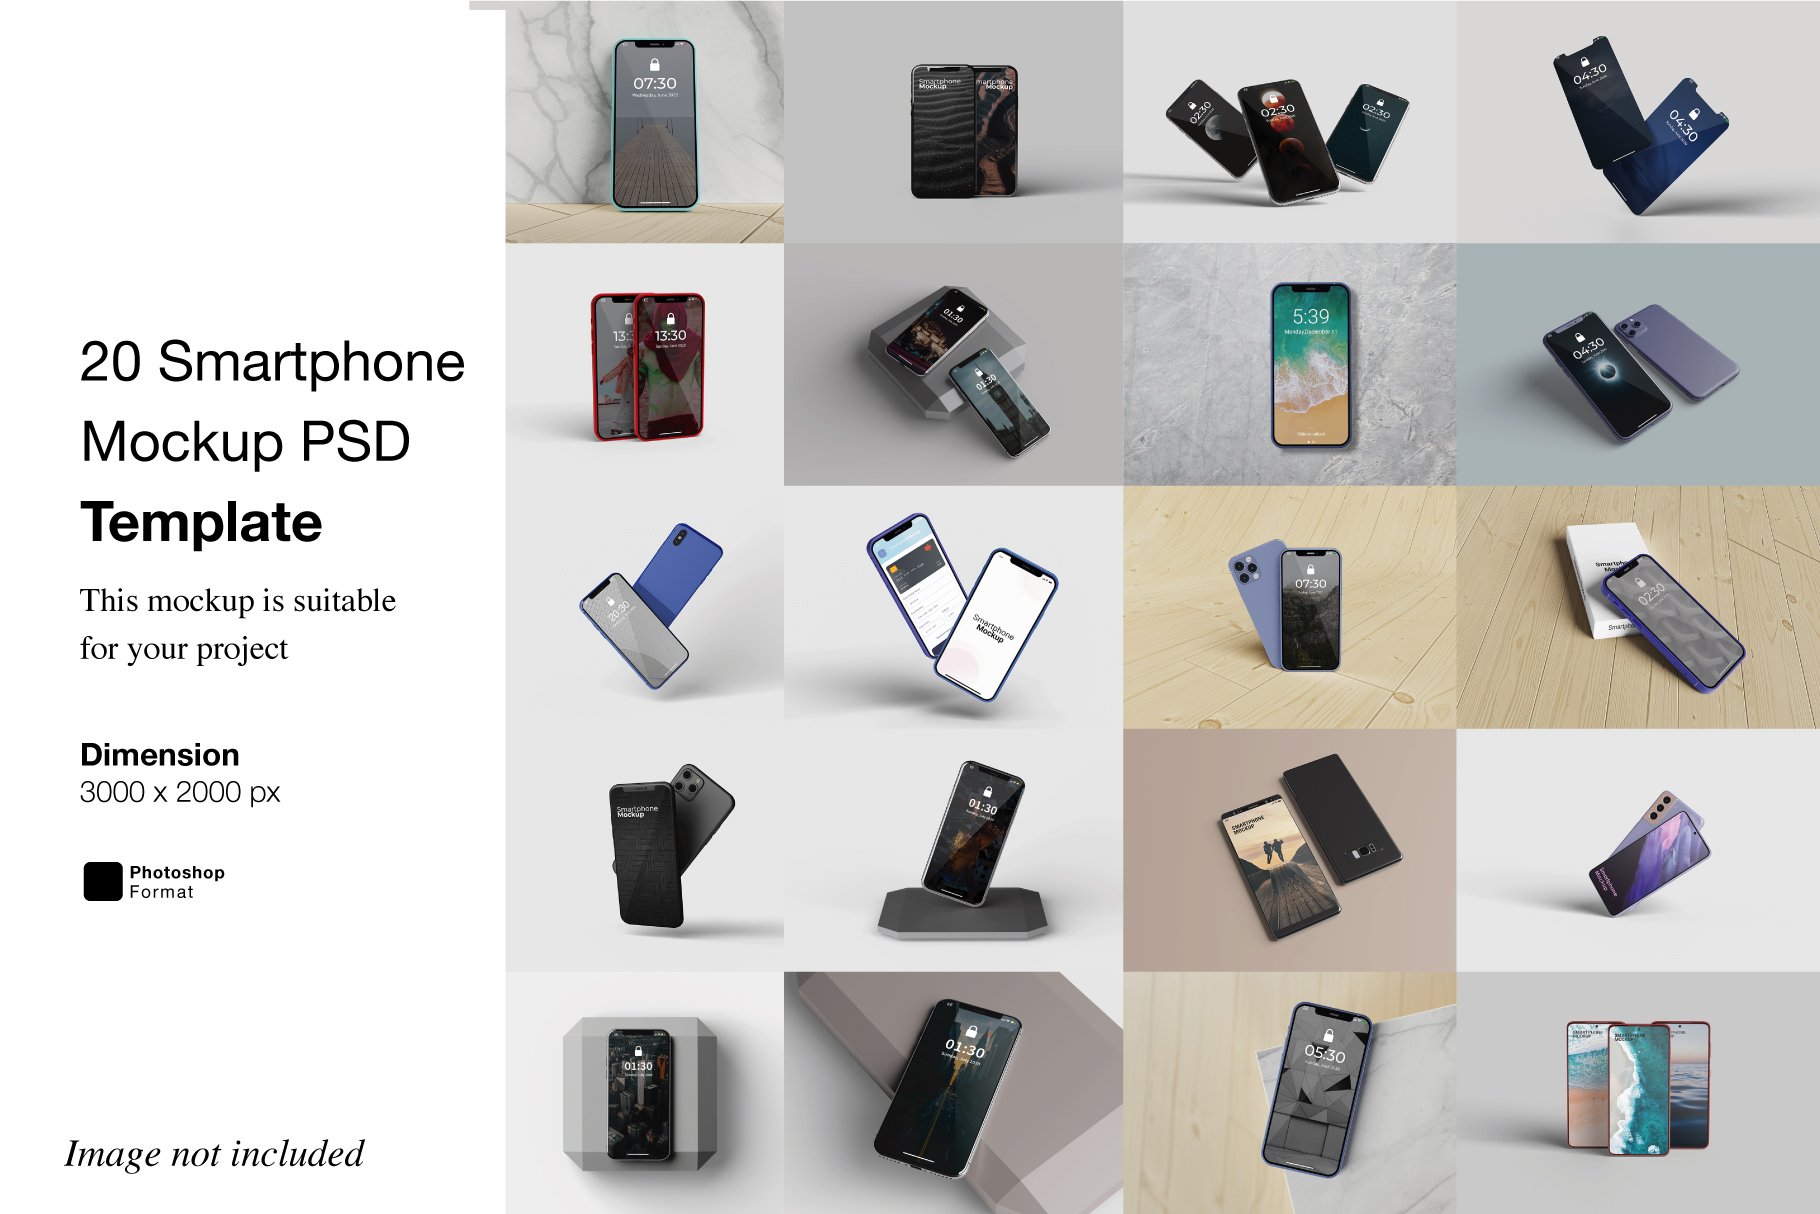 20 Smartphone Mockup PSD Template cover image.